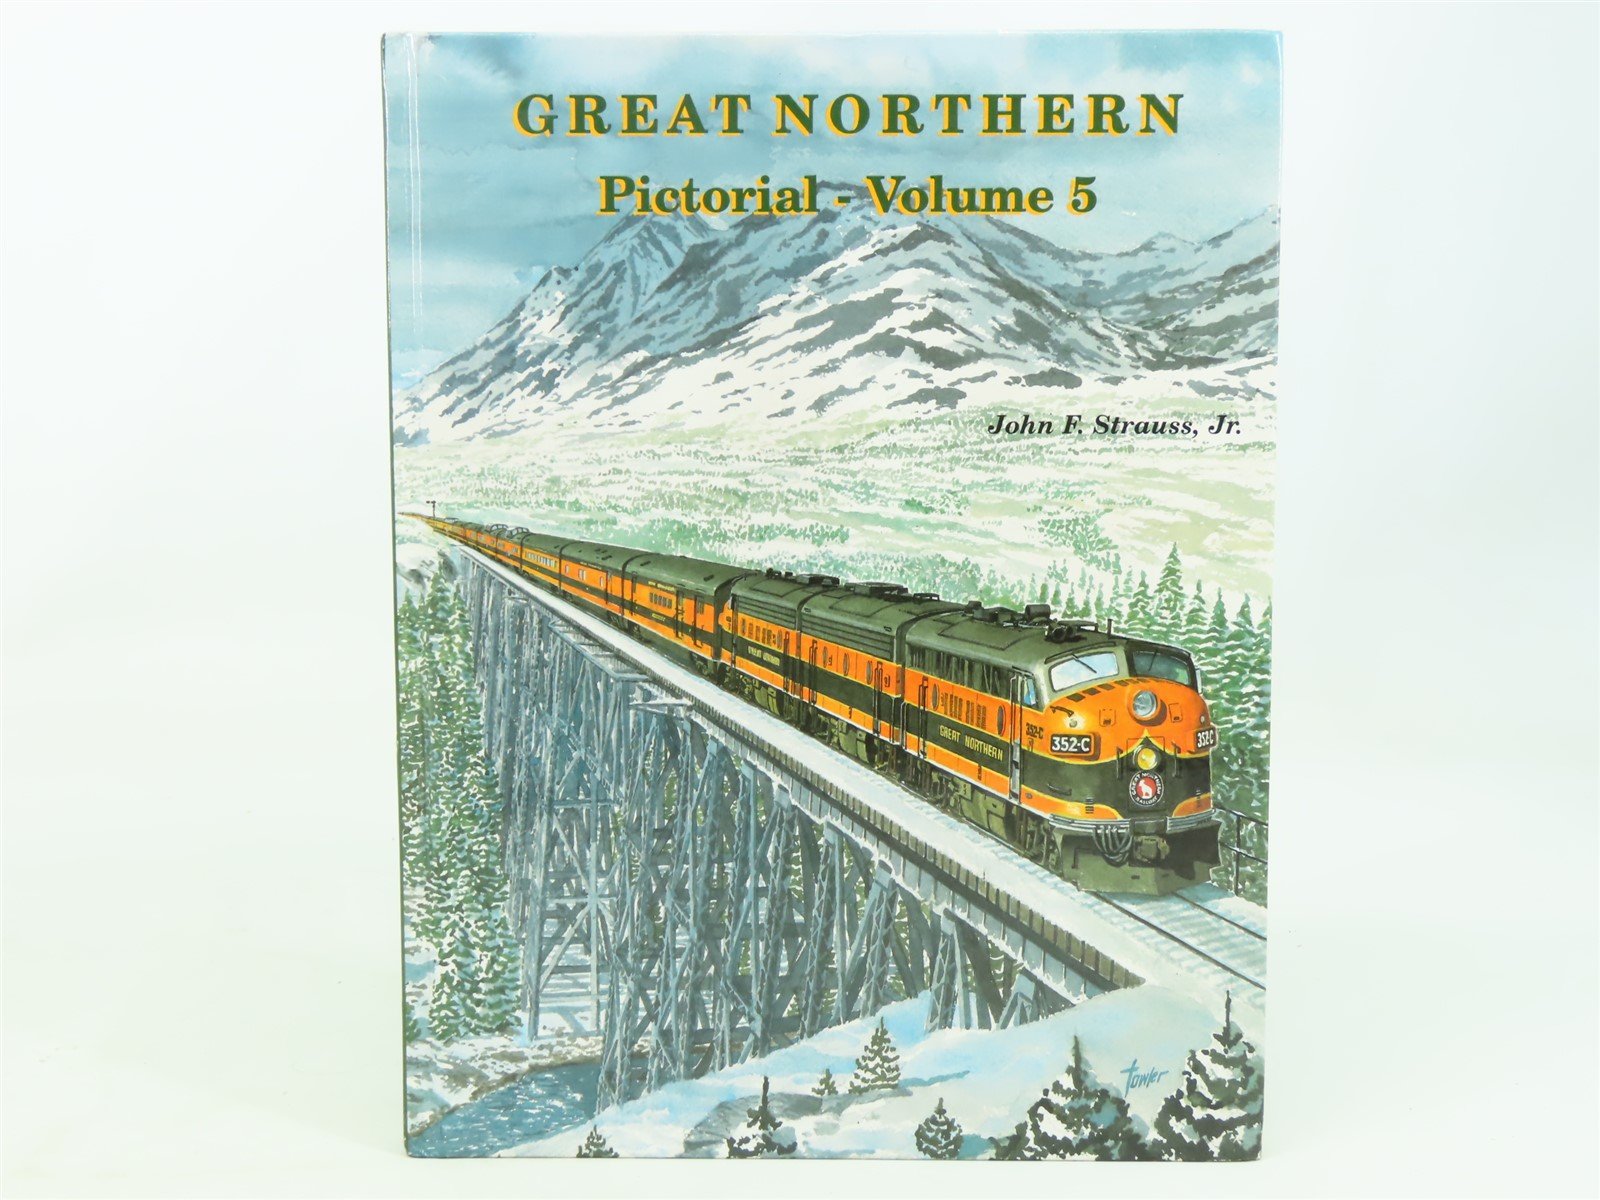 Great Northern Pictorial - Volume 5 by John F. Strauss, Jr. ©1998 HC Book